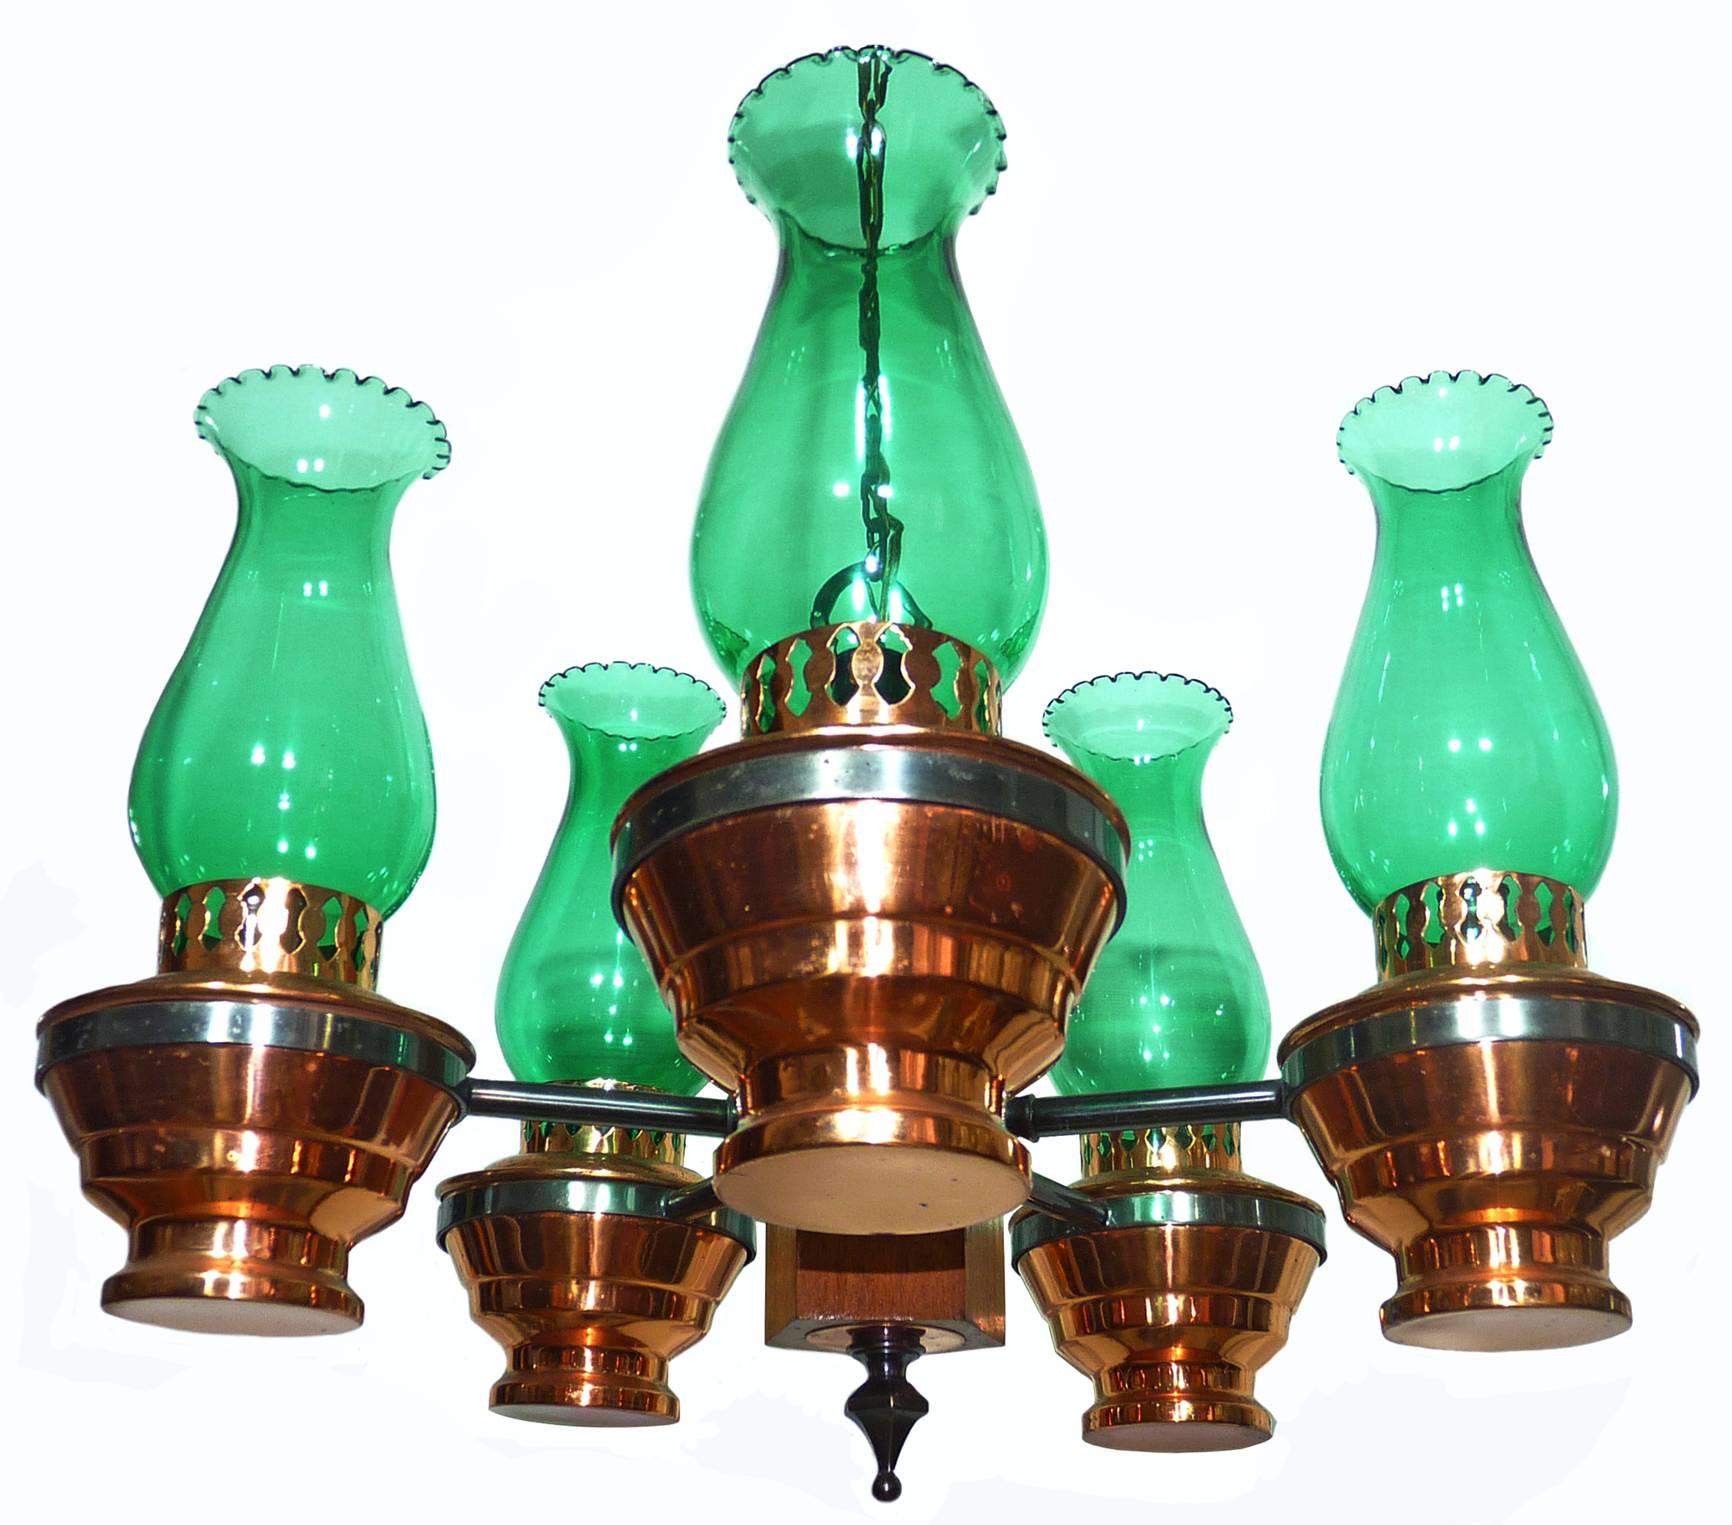 Vintage French colonial copper oil lamp chandelier with wood and green glass shades
Beautiful age patina
Measures:
Diameter 20 in / 50 cm
Height 32 in / 80 cm (chain=20 cm/ 8 in)
Glass shades 4 in (10 cm) / 8 in (20 cm)
Weight 11 lb. (5